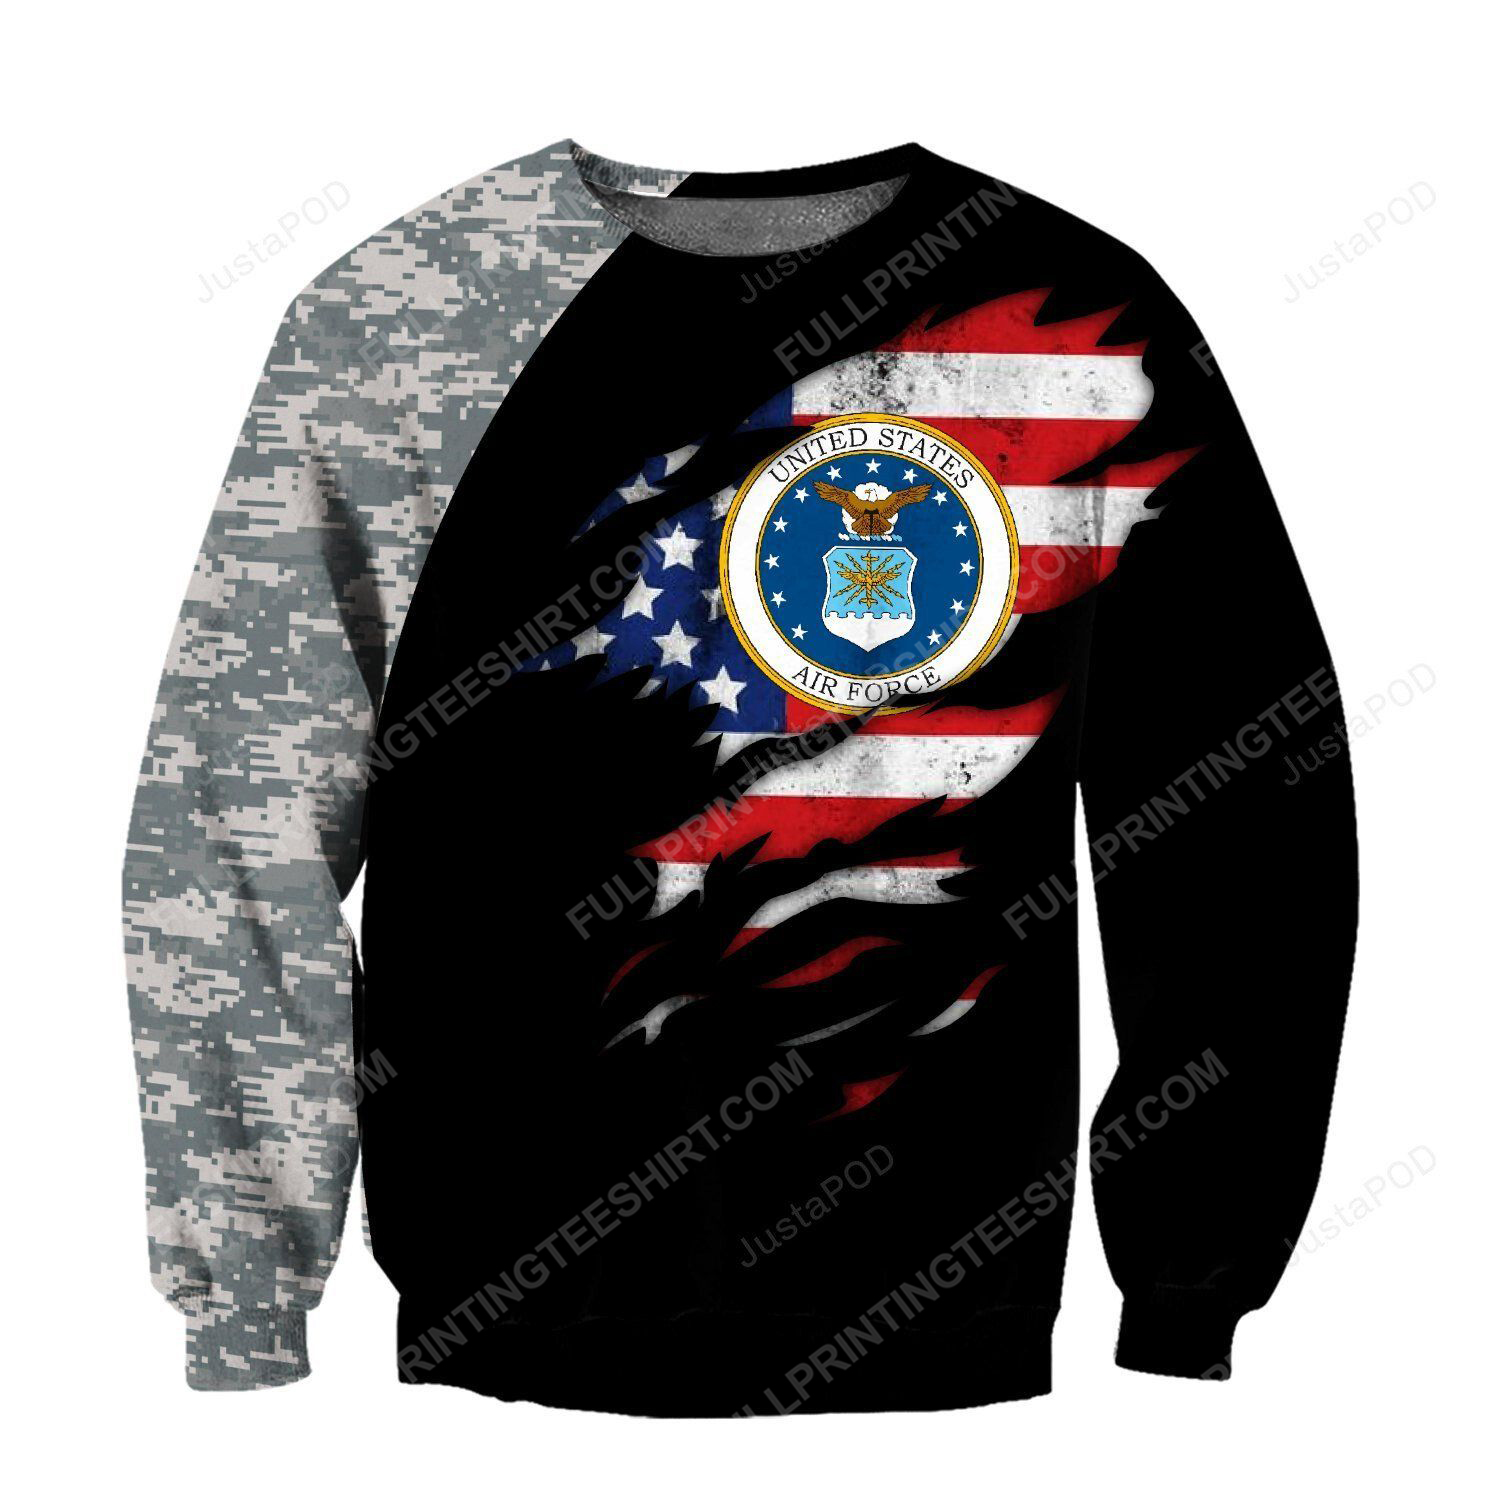 United states air force full print ugly christmas sweater